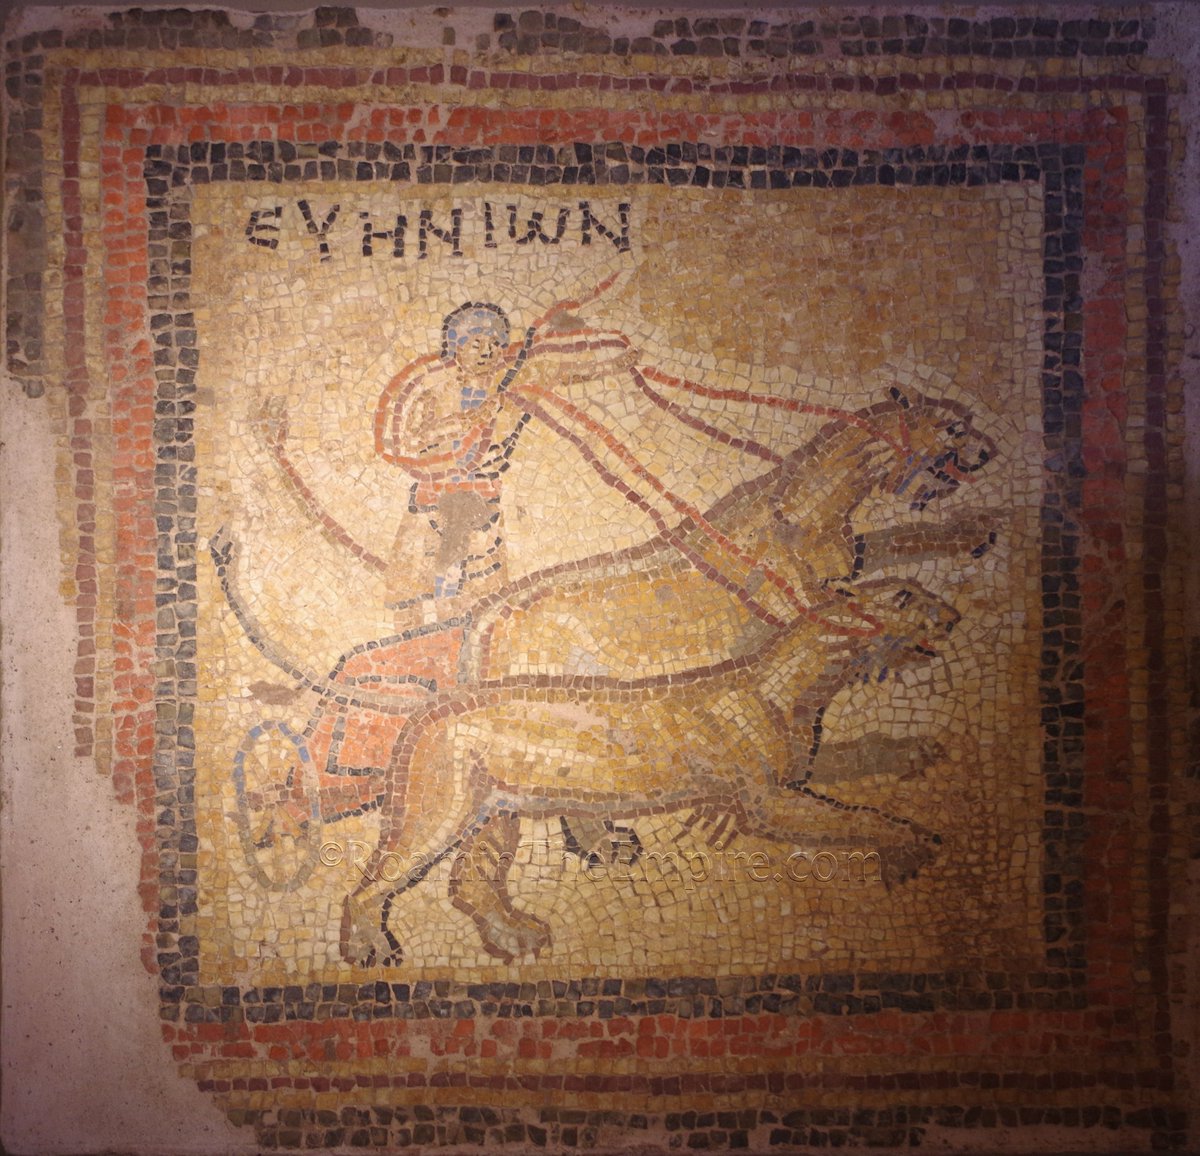 #MosaicMonday, from the Archaeological Museum of Messinia in Kalamata, a mosaic depicting a chariot drawn by panthers. Inscribed above is ΕΥΗΝΙΩΝ, excellent charioteer. From Desillas, dated to the 5th century CE.

#Archaeology #RomanArchaeology #Greece